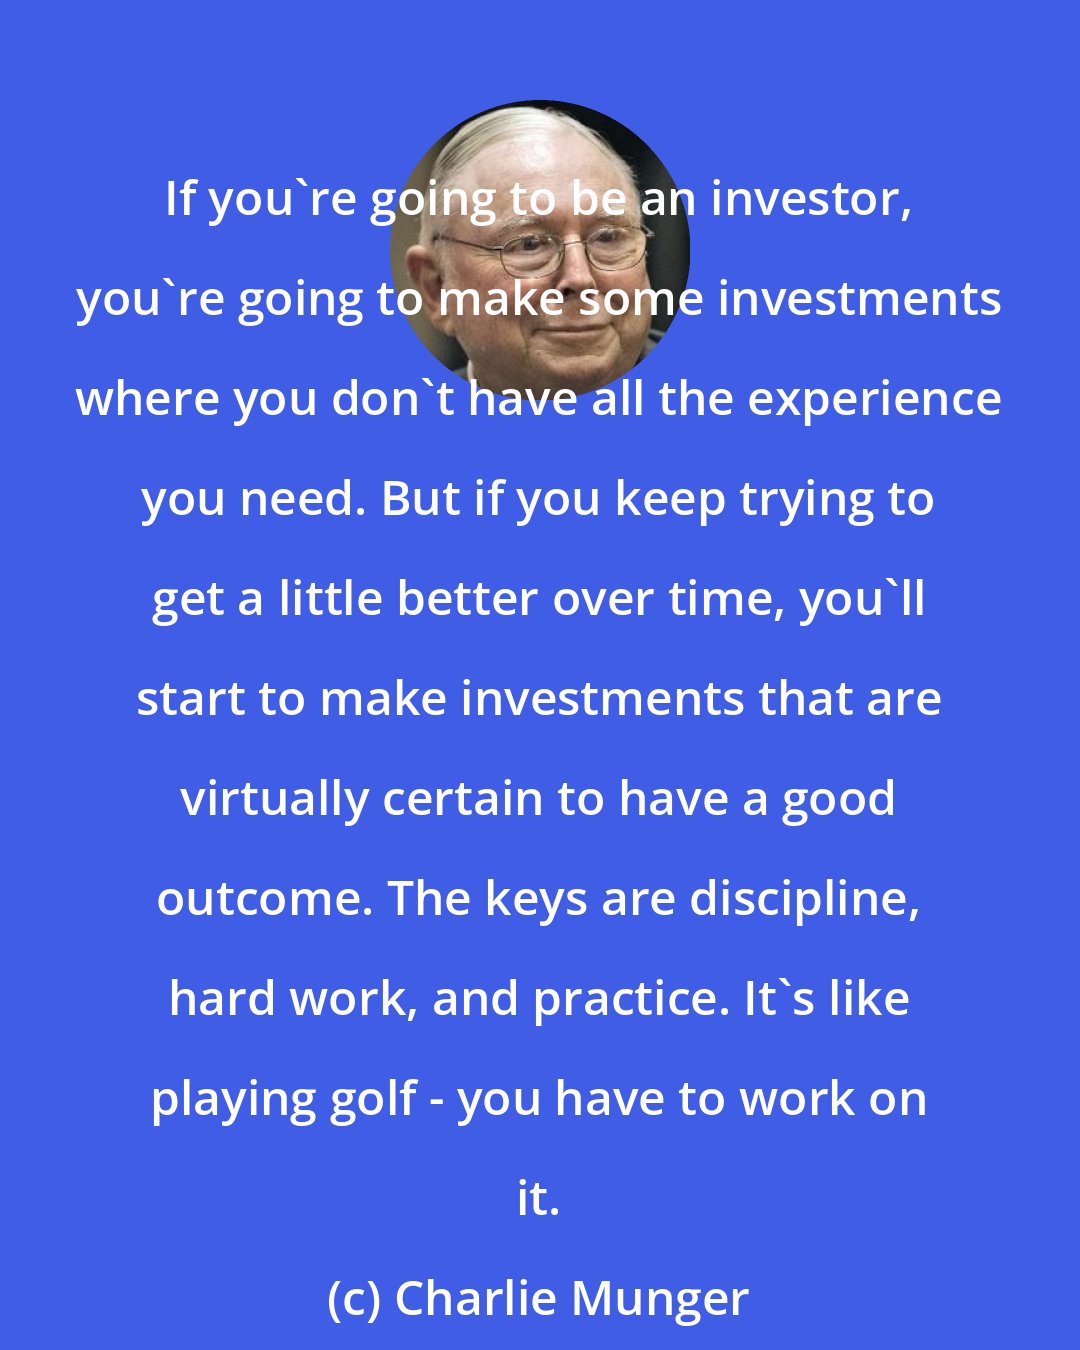 Charlie Munger: If you're going to be an investor, you're going to make some investments where you don't have all the experience you need. But if you keep trying to get a little better over time, you'll start to make investments that are virtually certain to have a good outcome. The keys are discipline, hard work, and practice. It's like playing golf - you have to work on it.